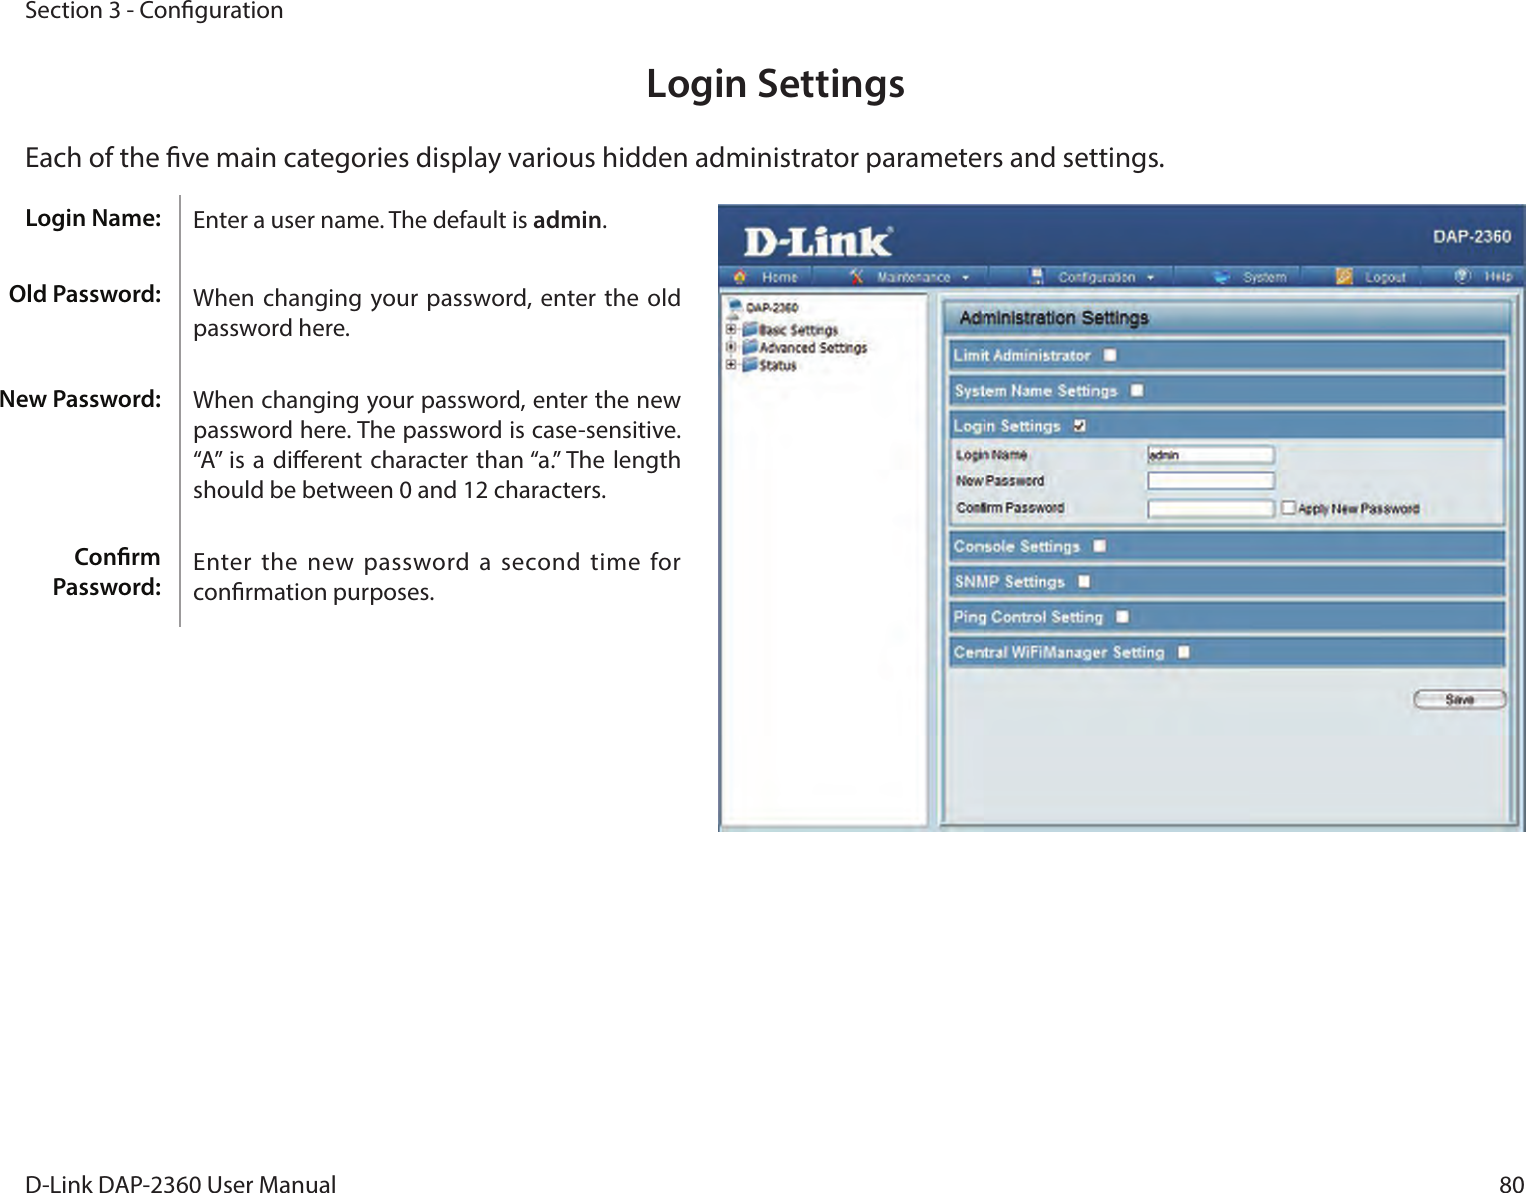 80D-Link DAP-2360 User ManualSection 3 - CongurationLogin SettingsEach of the ve main categories display various hidden administrator parameters and settings.Enter a user name. The default is admin.When changing your password, enter the old password here.When changing your password, enter the new password here. The password is case-sensitive. “A” is a dierent character  than “a.” The length should be between 0 and 12 characters.Enter the new  password a  second time for conrmation purposes.Login Name:Old Password:New Password:Conrm Password: